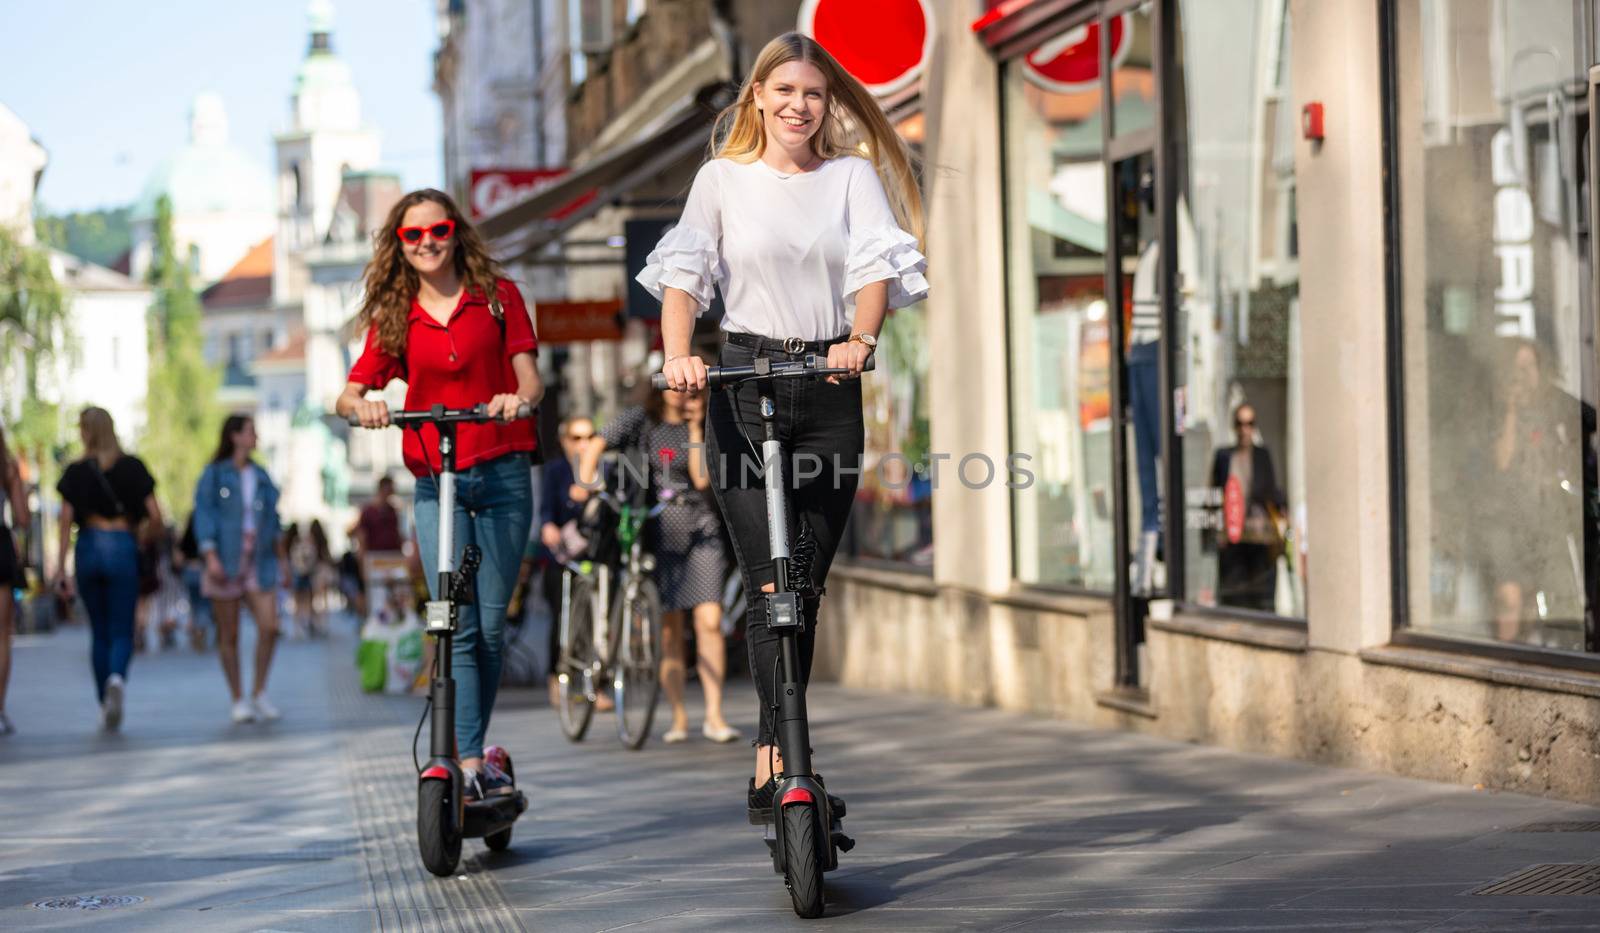 Trendy fashinable teenager girls riding public rental electric scooters in urban city environment. New eco-friendly modern public city transport in Ljubljana, Slovenia.